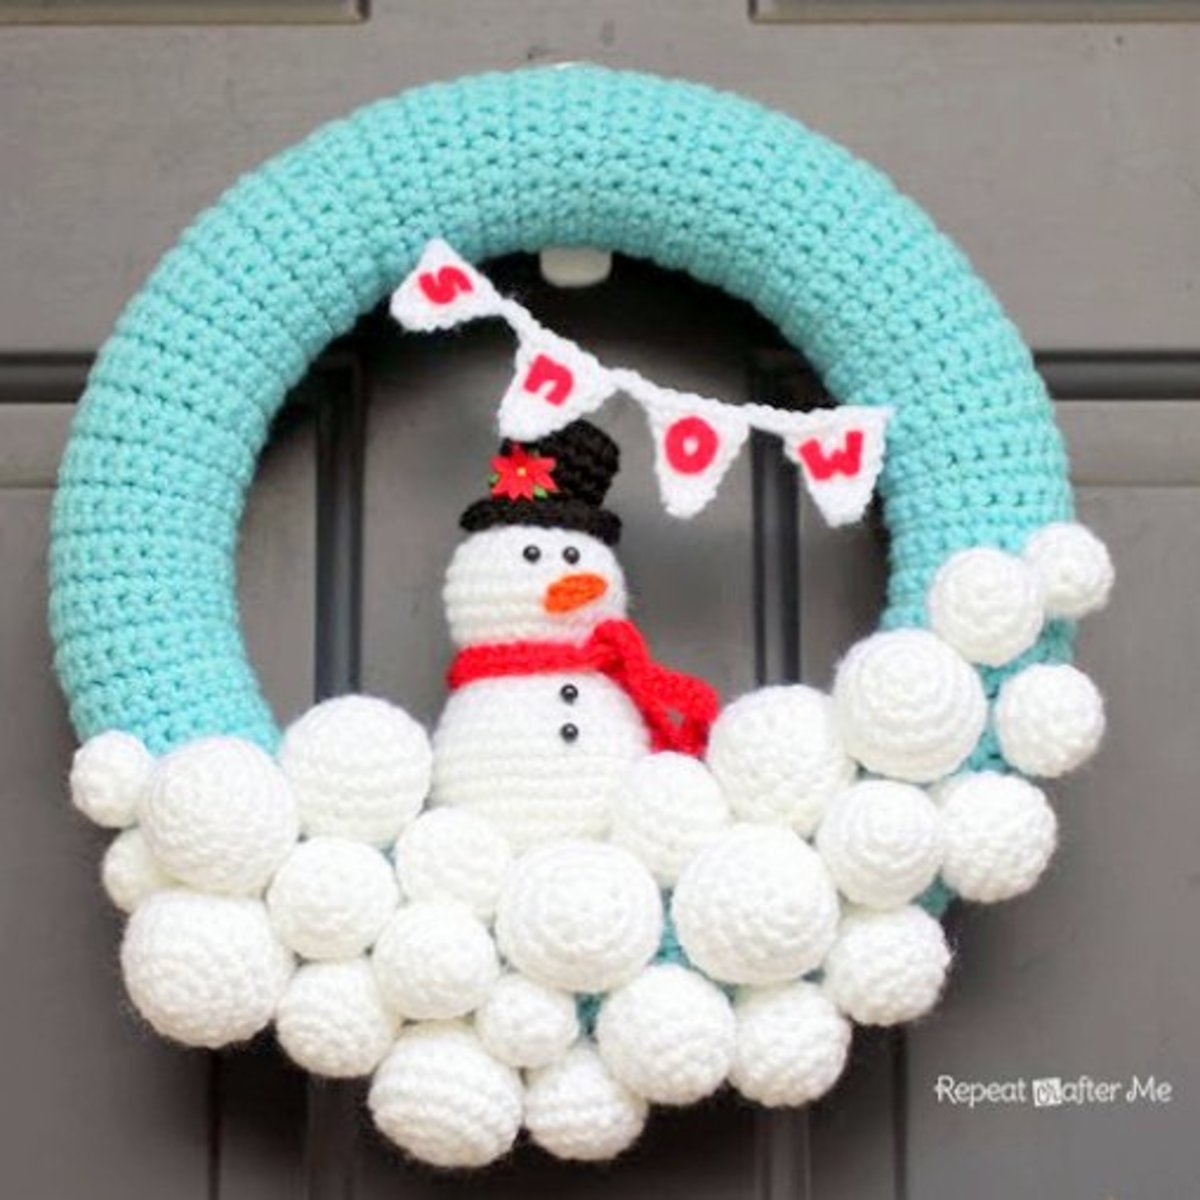 Free pattern for crocheted snowball winter snowman wreath.